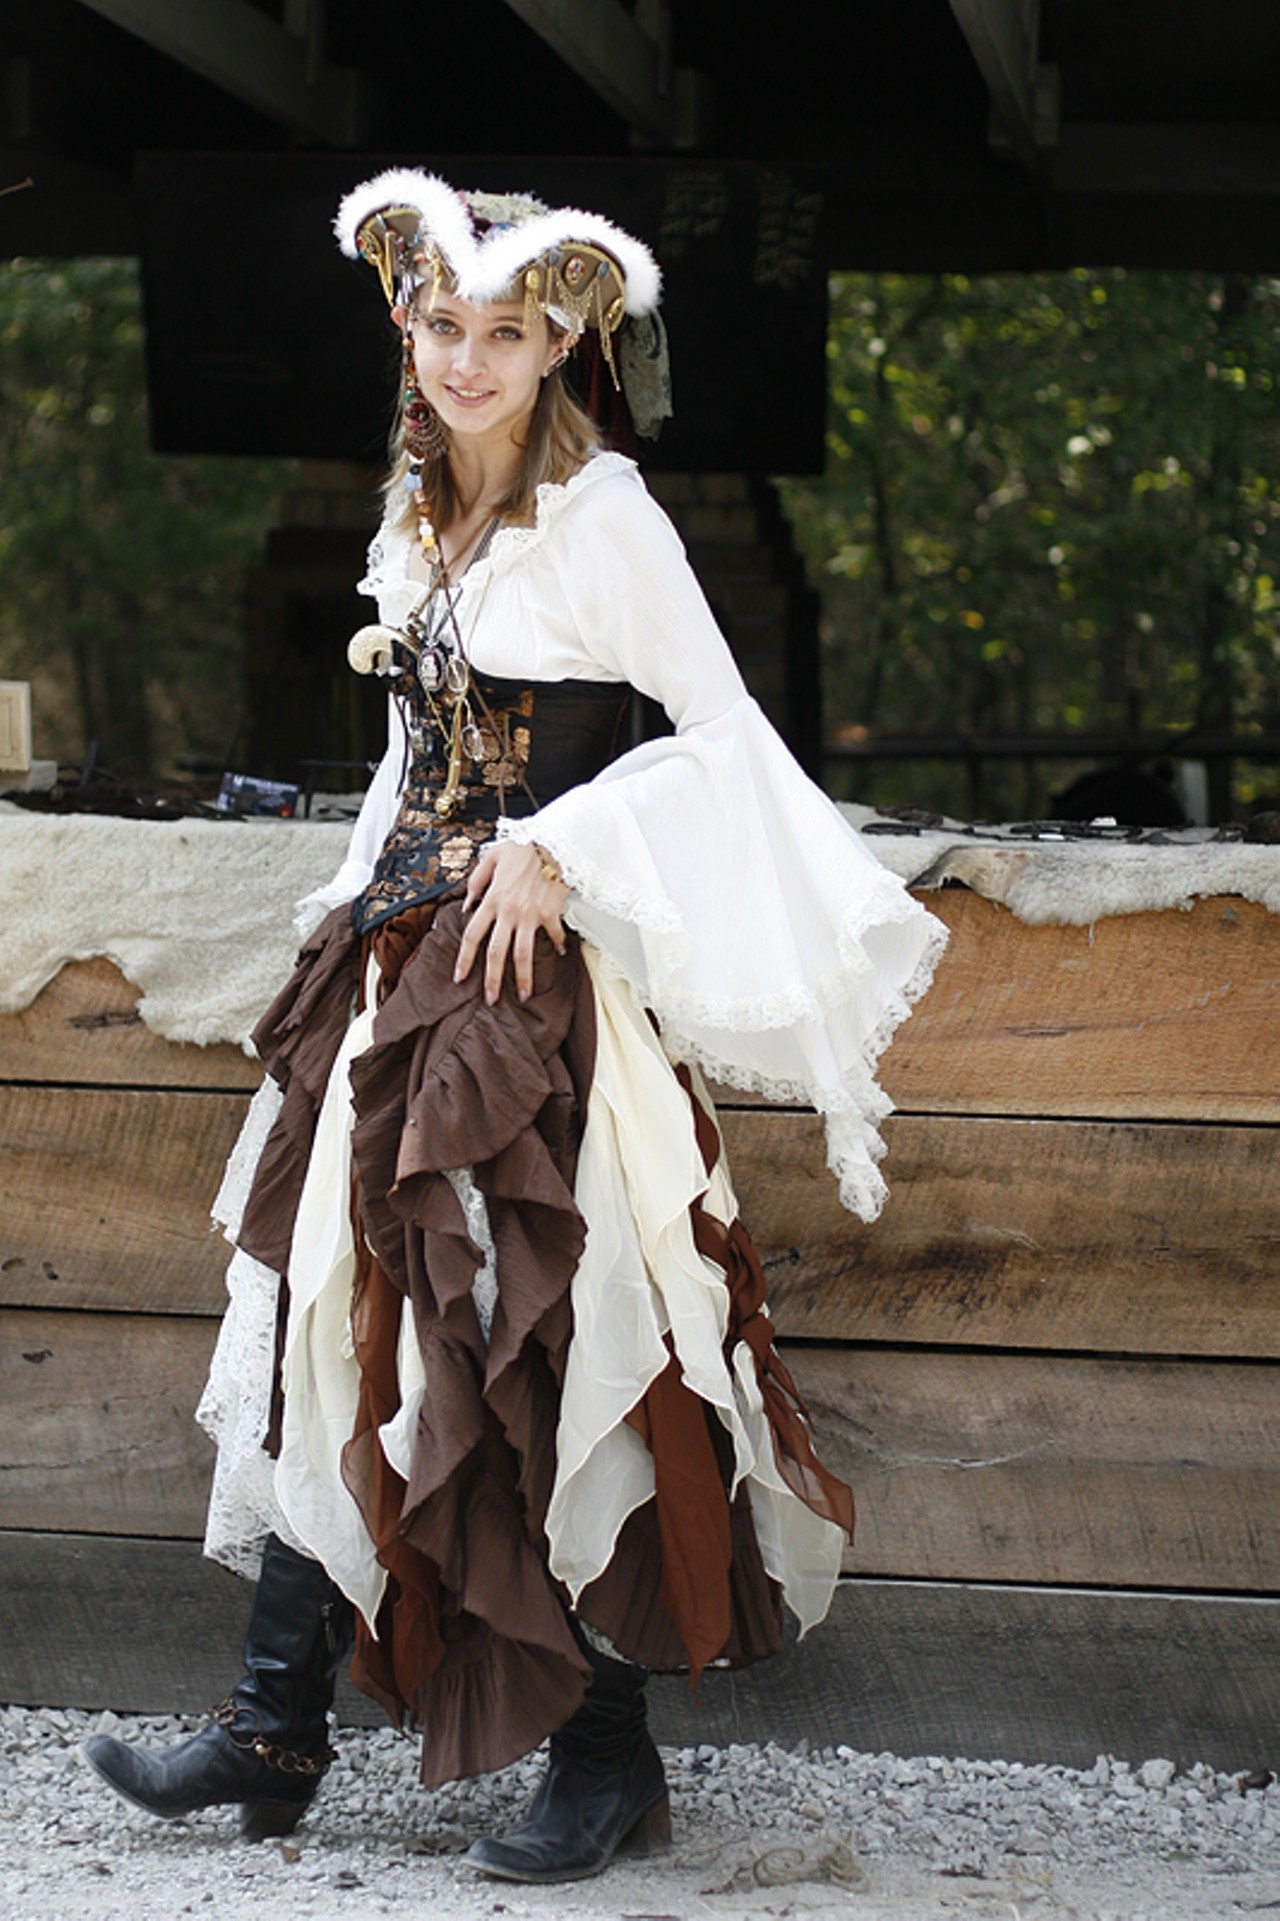 Elle Walker said her costume accumulated more accessories over the years, some from her mother's jewelry and stuff found at previous Pirate Festivals.